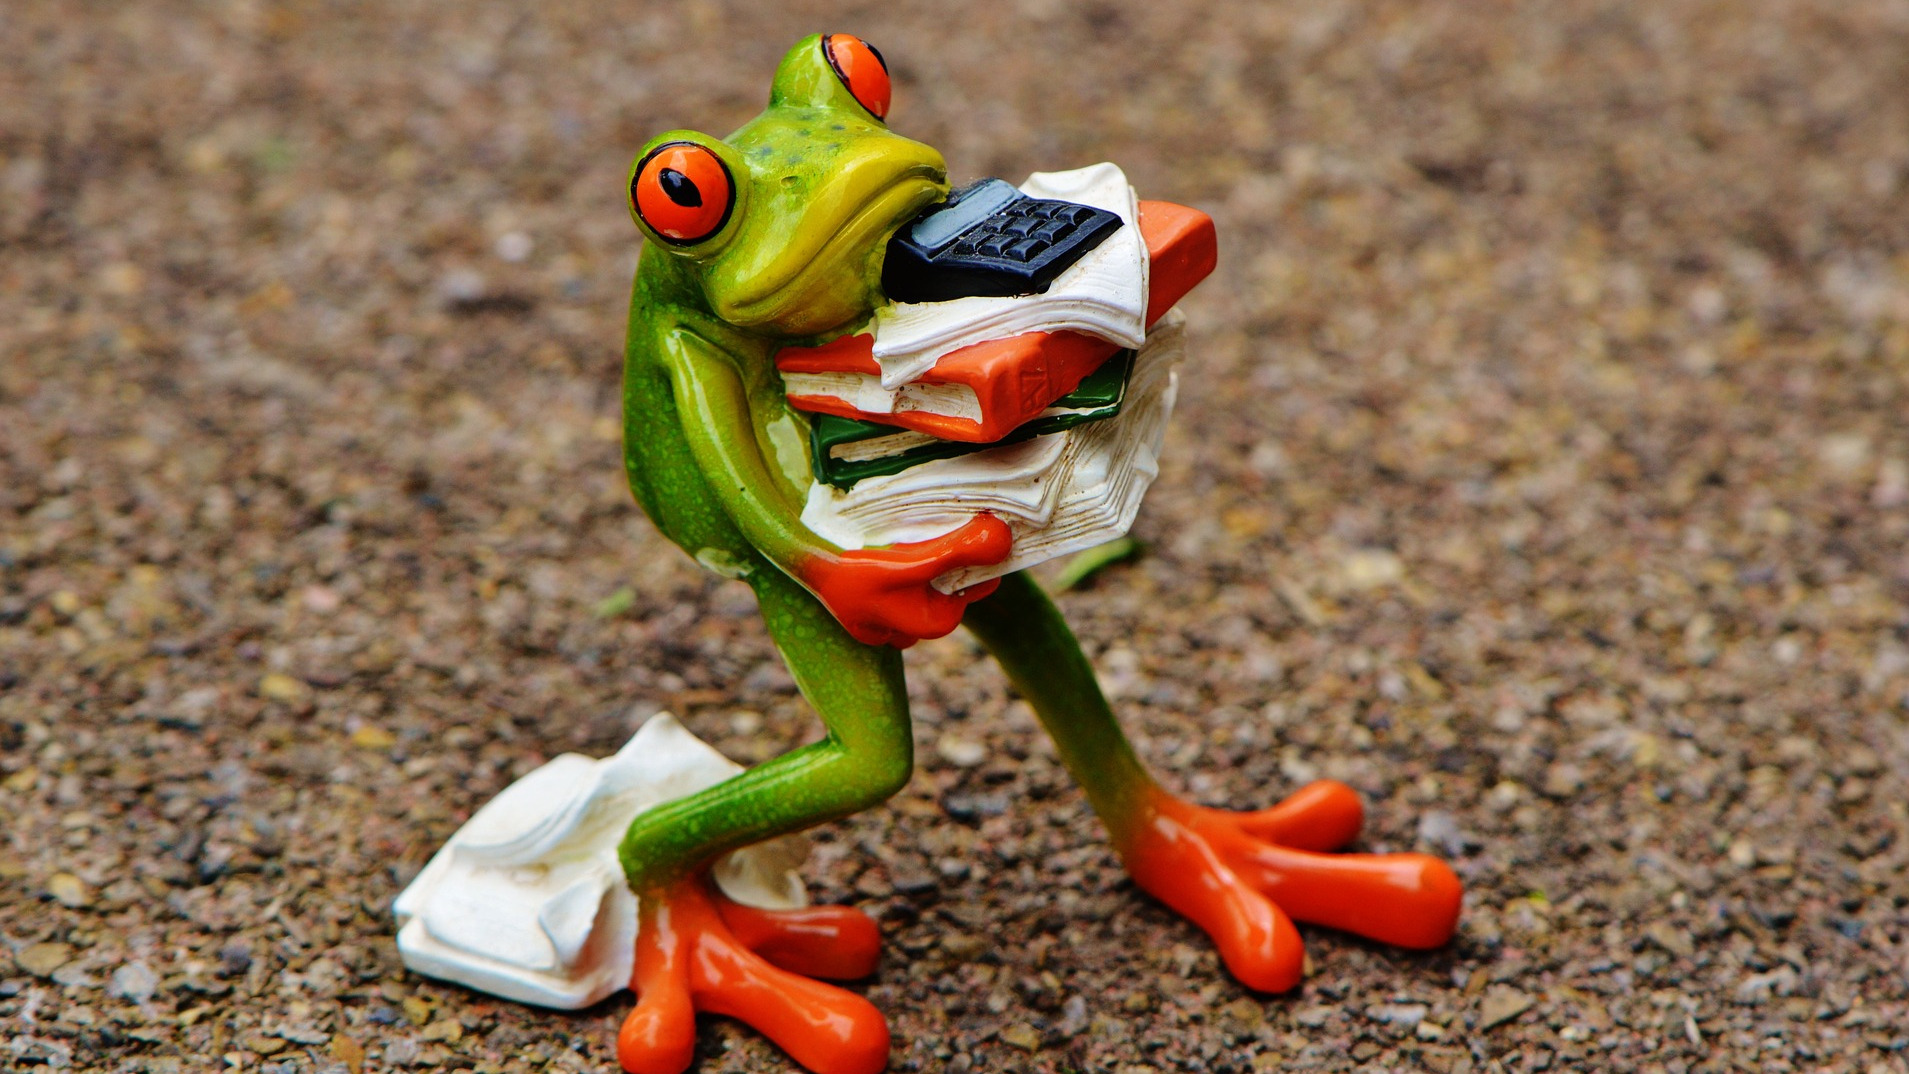 Toy frog looking stressed holding computer files